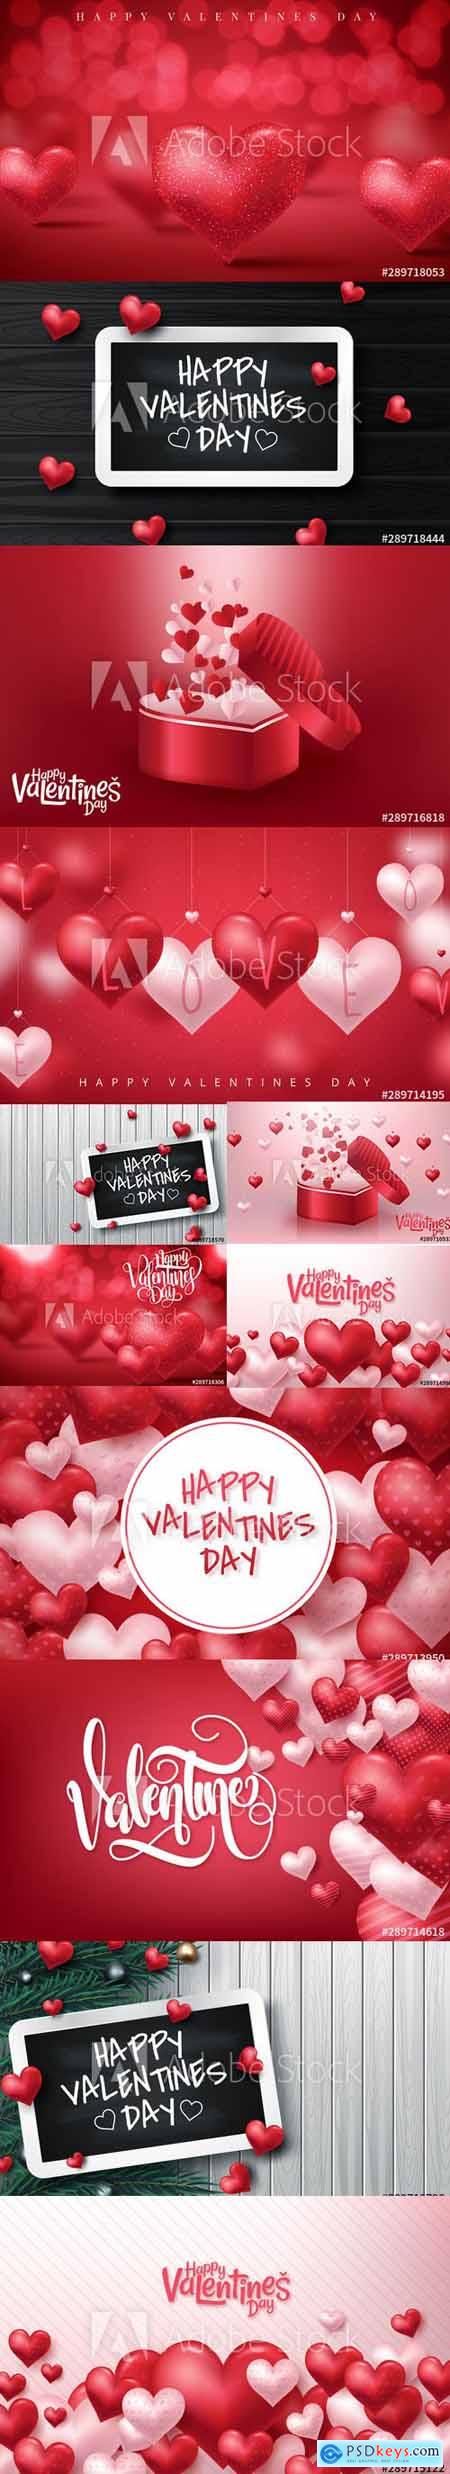 Colorful Happy Valentines Day Illustration with 3D hearts